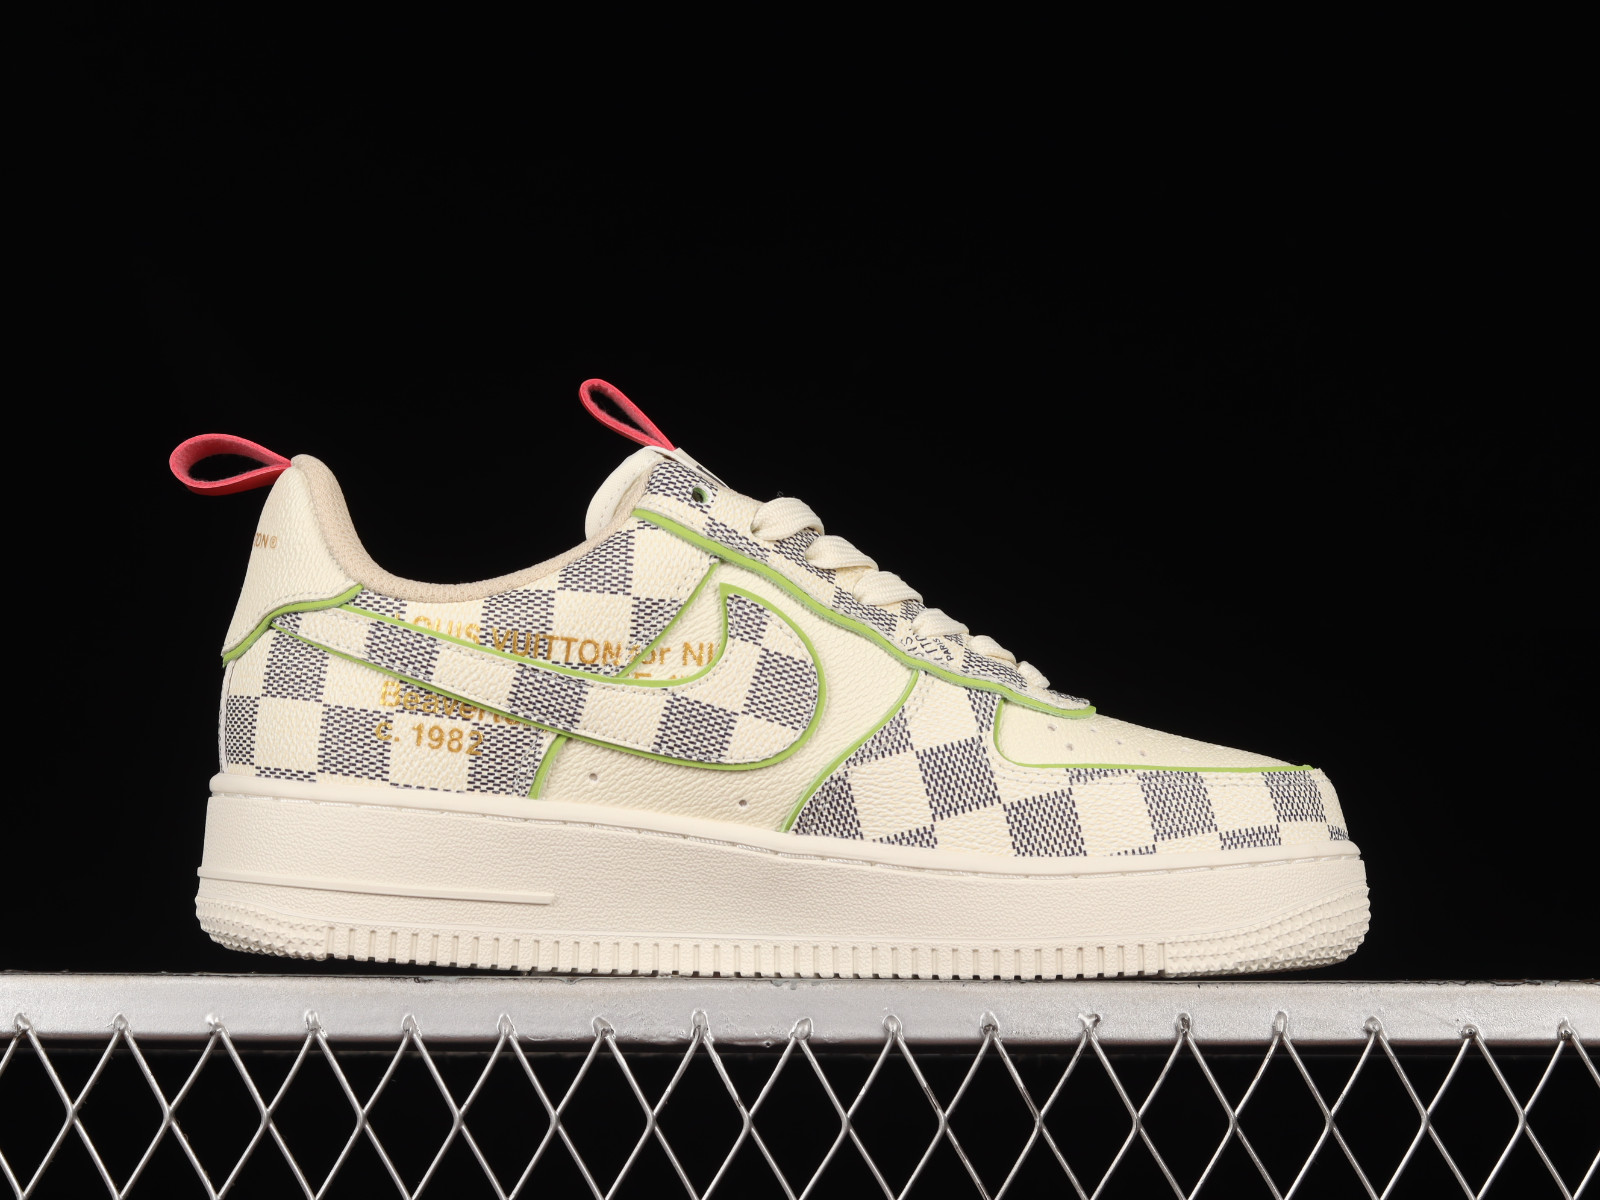 StclaircomoShops - LV x Air Force 1 07 Low Chess Cream Grey Green Red 1A9V8H - Chaussures NIKE Waffle Racer 2X DC9208 001 Black Sail